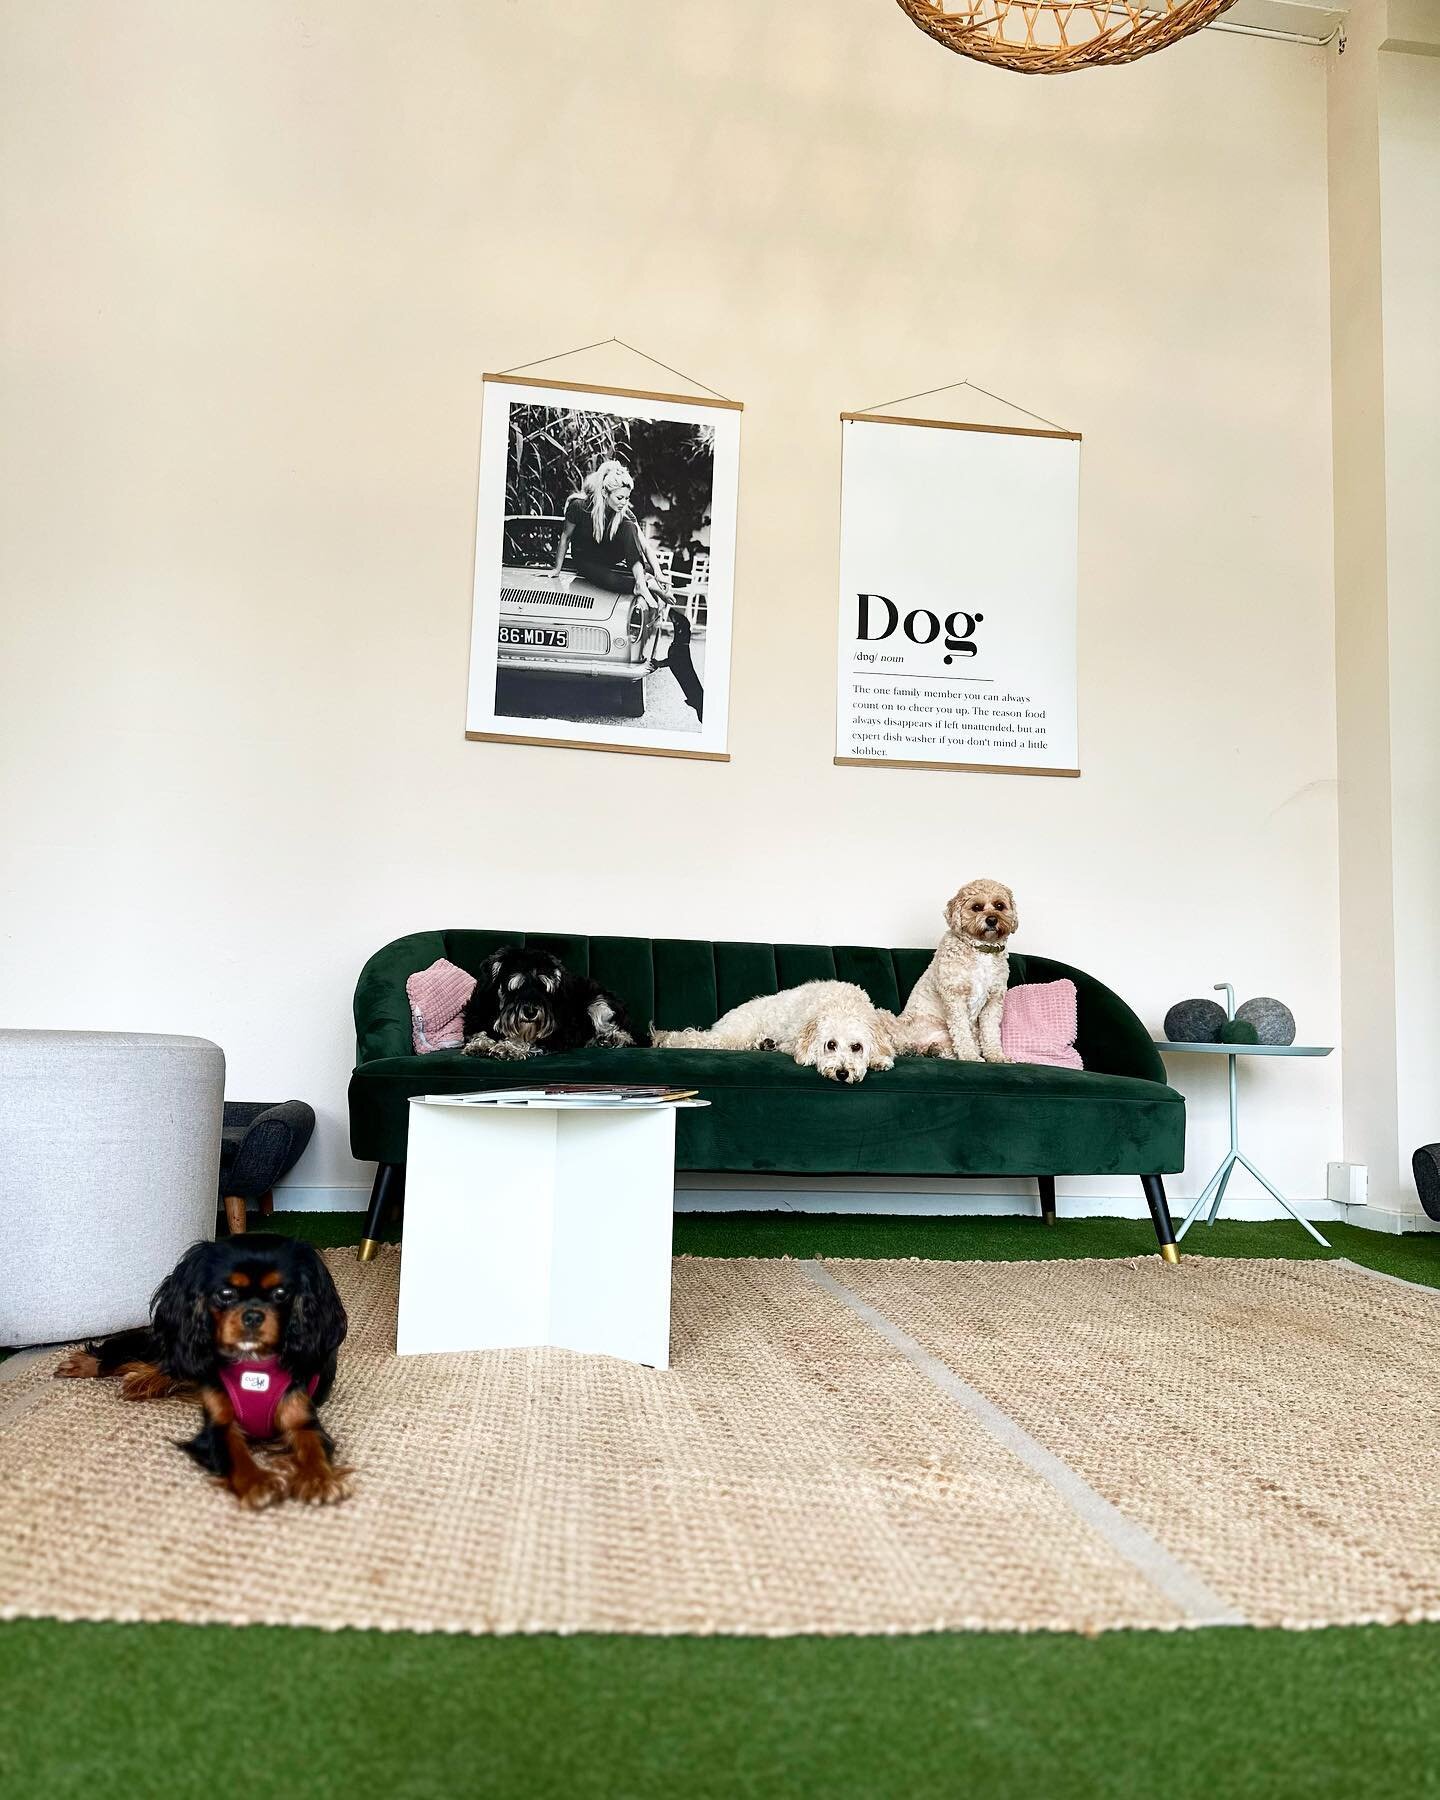 HAPPY FRIDAY❣️

#dogdaycare #daycare #together #dog #dogs #dogsofinstagram #photooftheday #friendship #co-exist #couch #treatyourself #zurich #dogsofzurich #love #beautiful #cute #everything #passion #boutique #school #grooming #happy #moments #enjoy